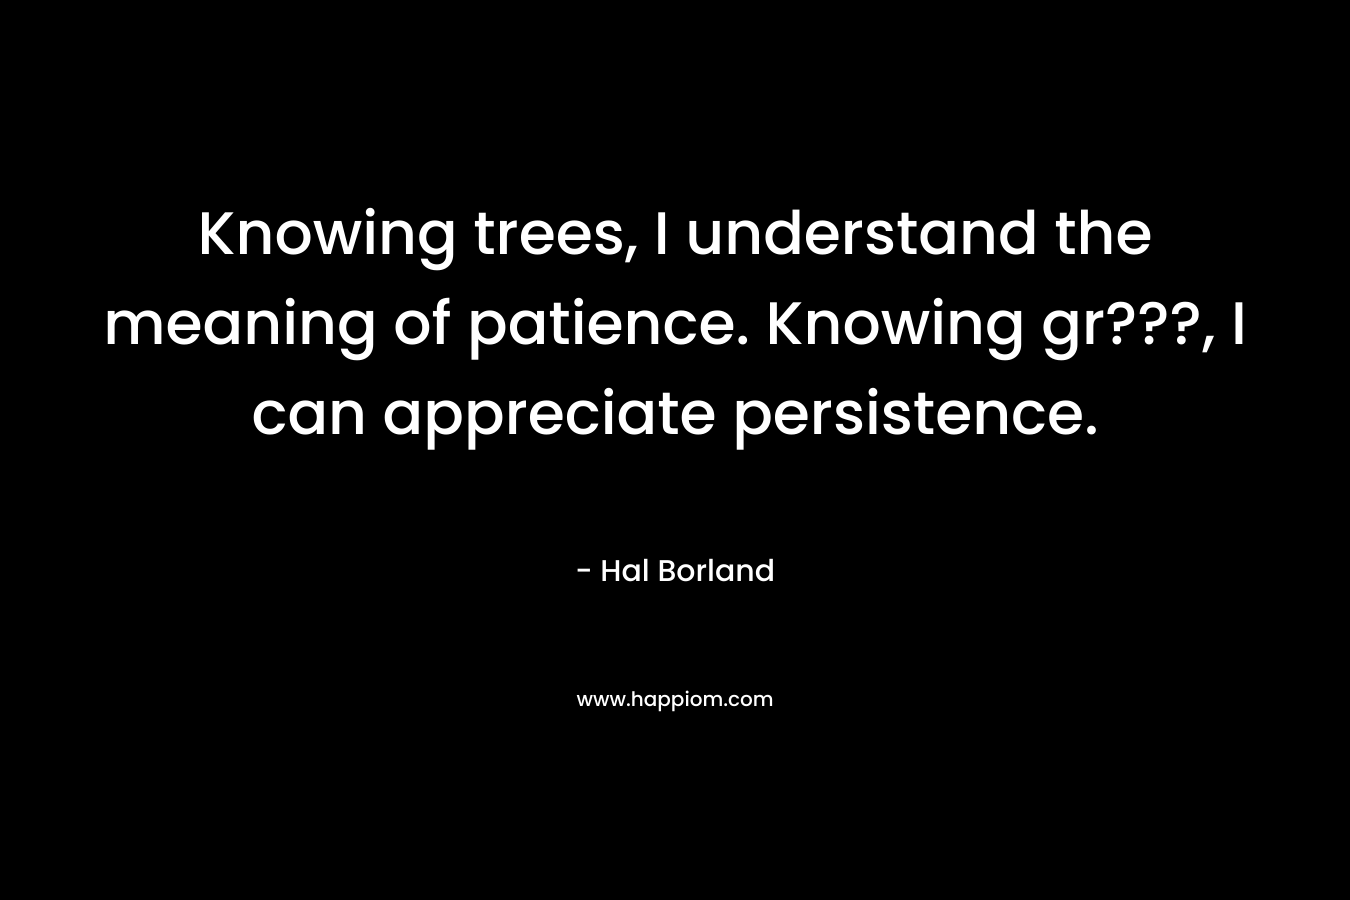 Knowing trees, I understand the meaning of patience. Knowing gr???, I can appreciate persistence. – Hal Borland